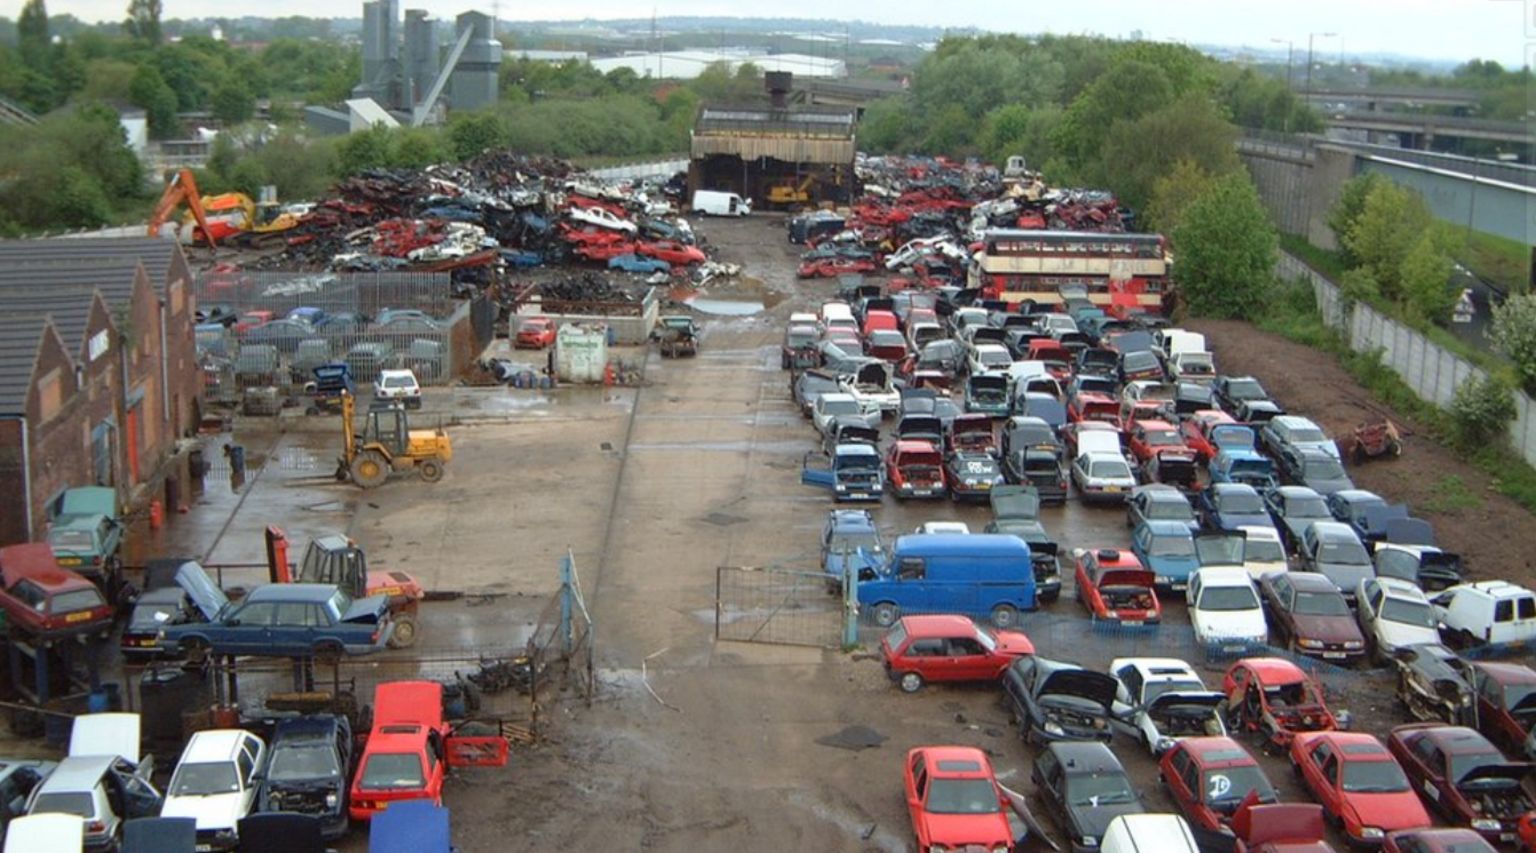 Aerial view of rows of cars ready for scrap